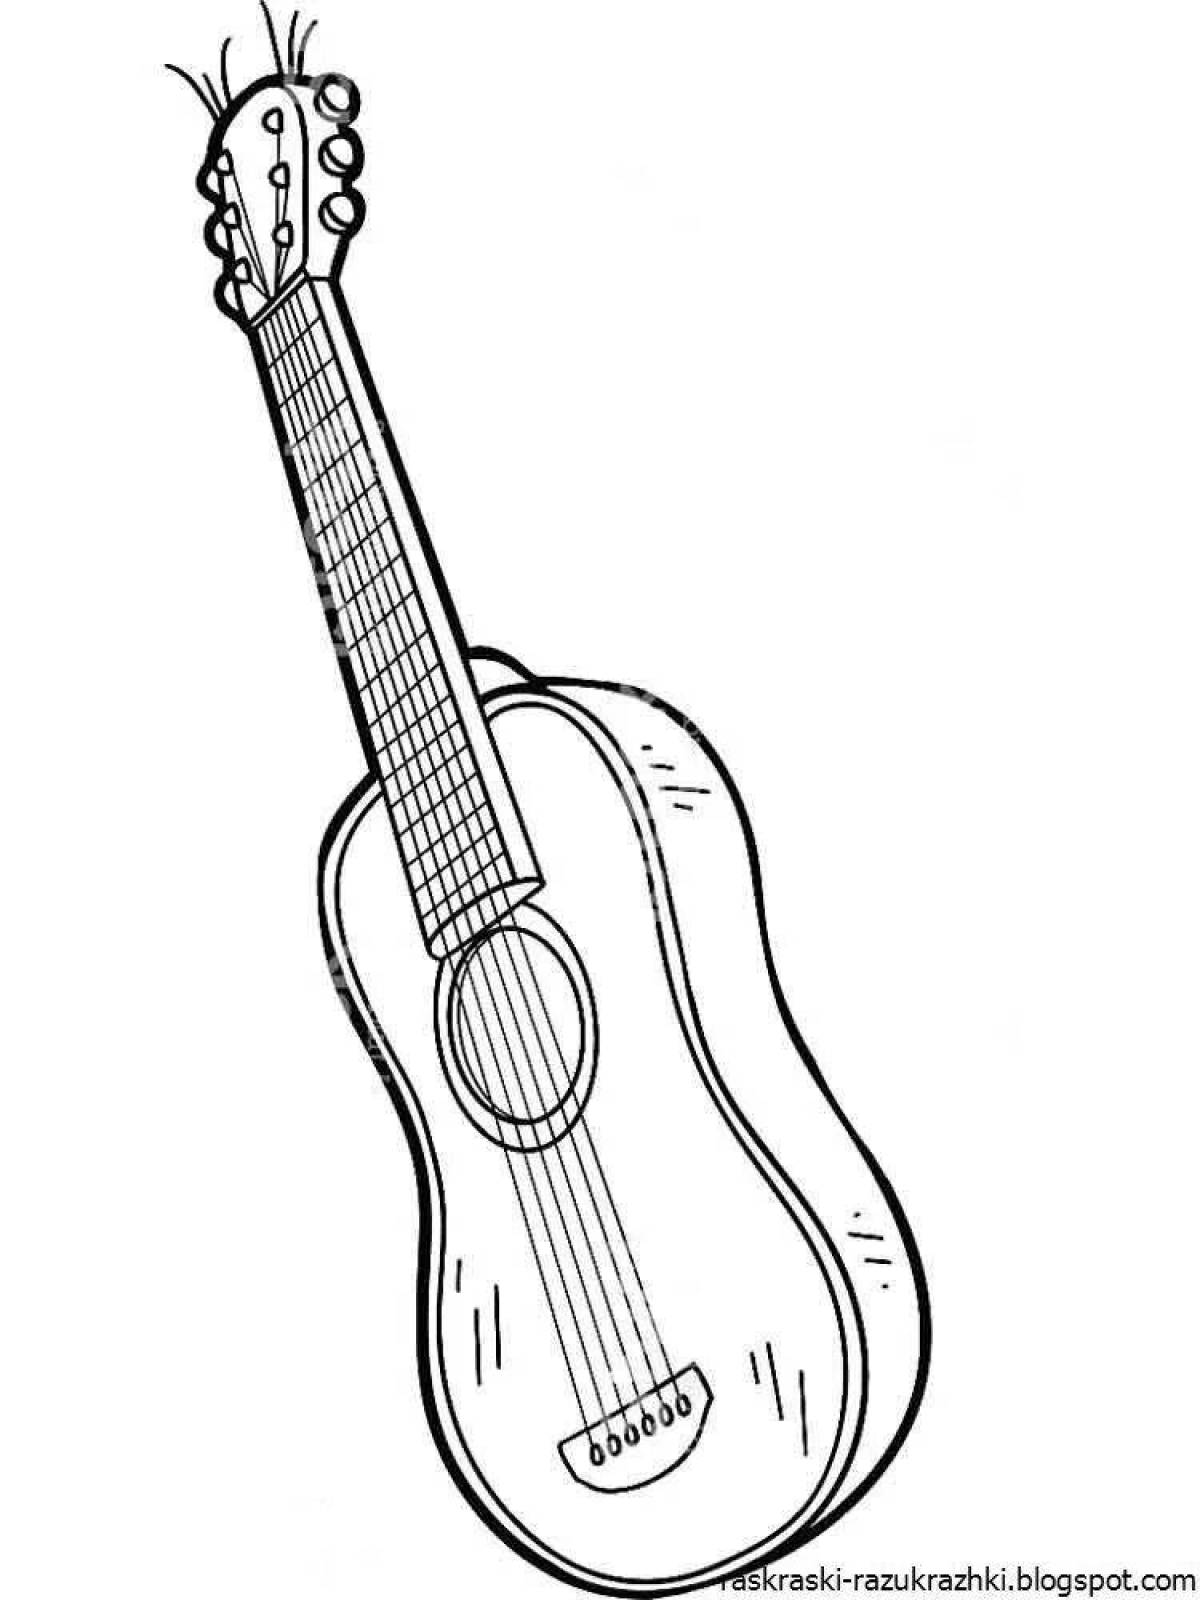 A fun coloring book for kids with a guitar